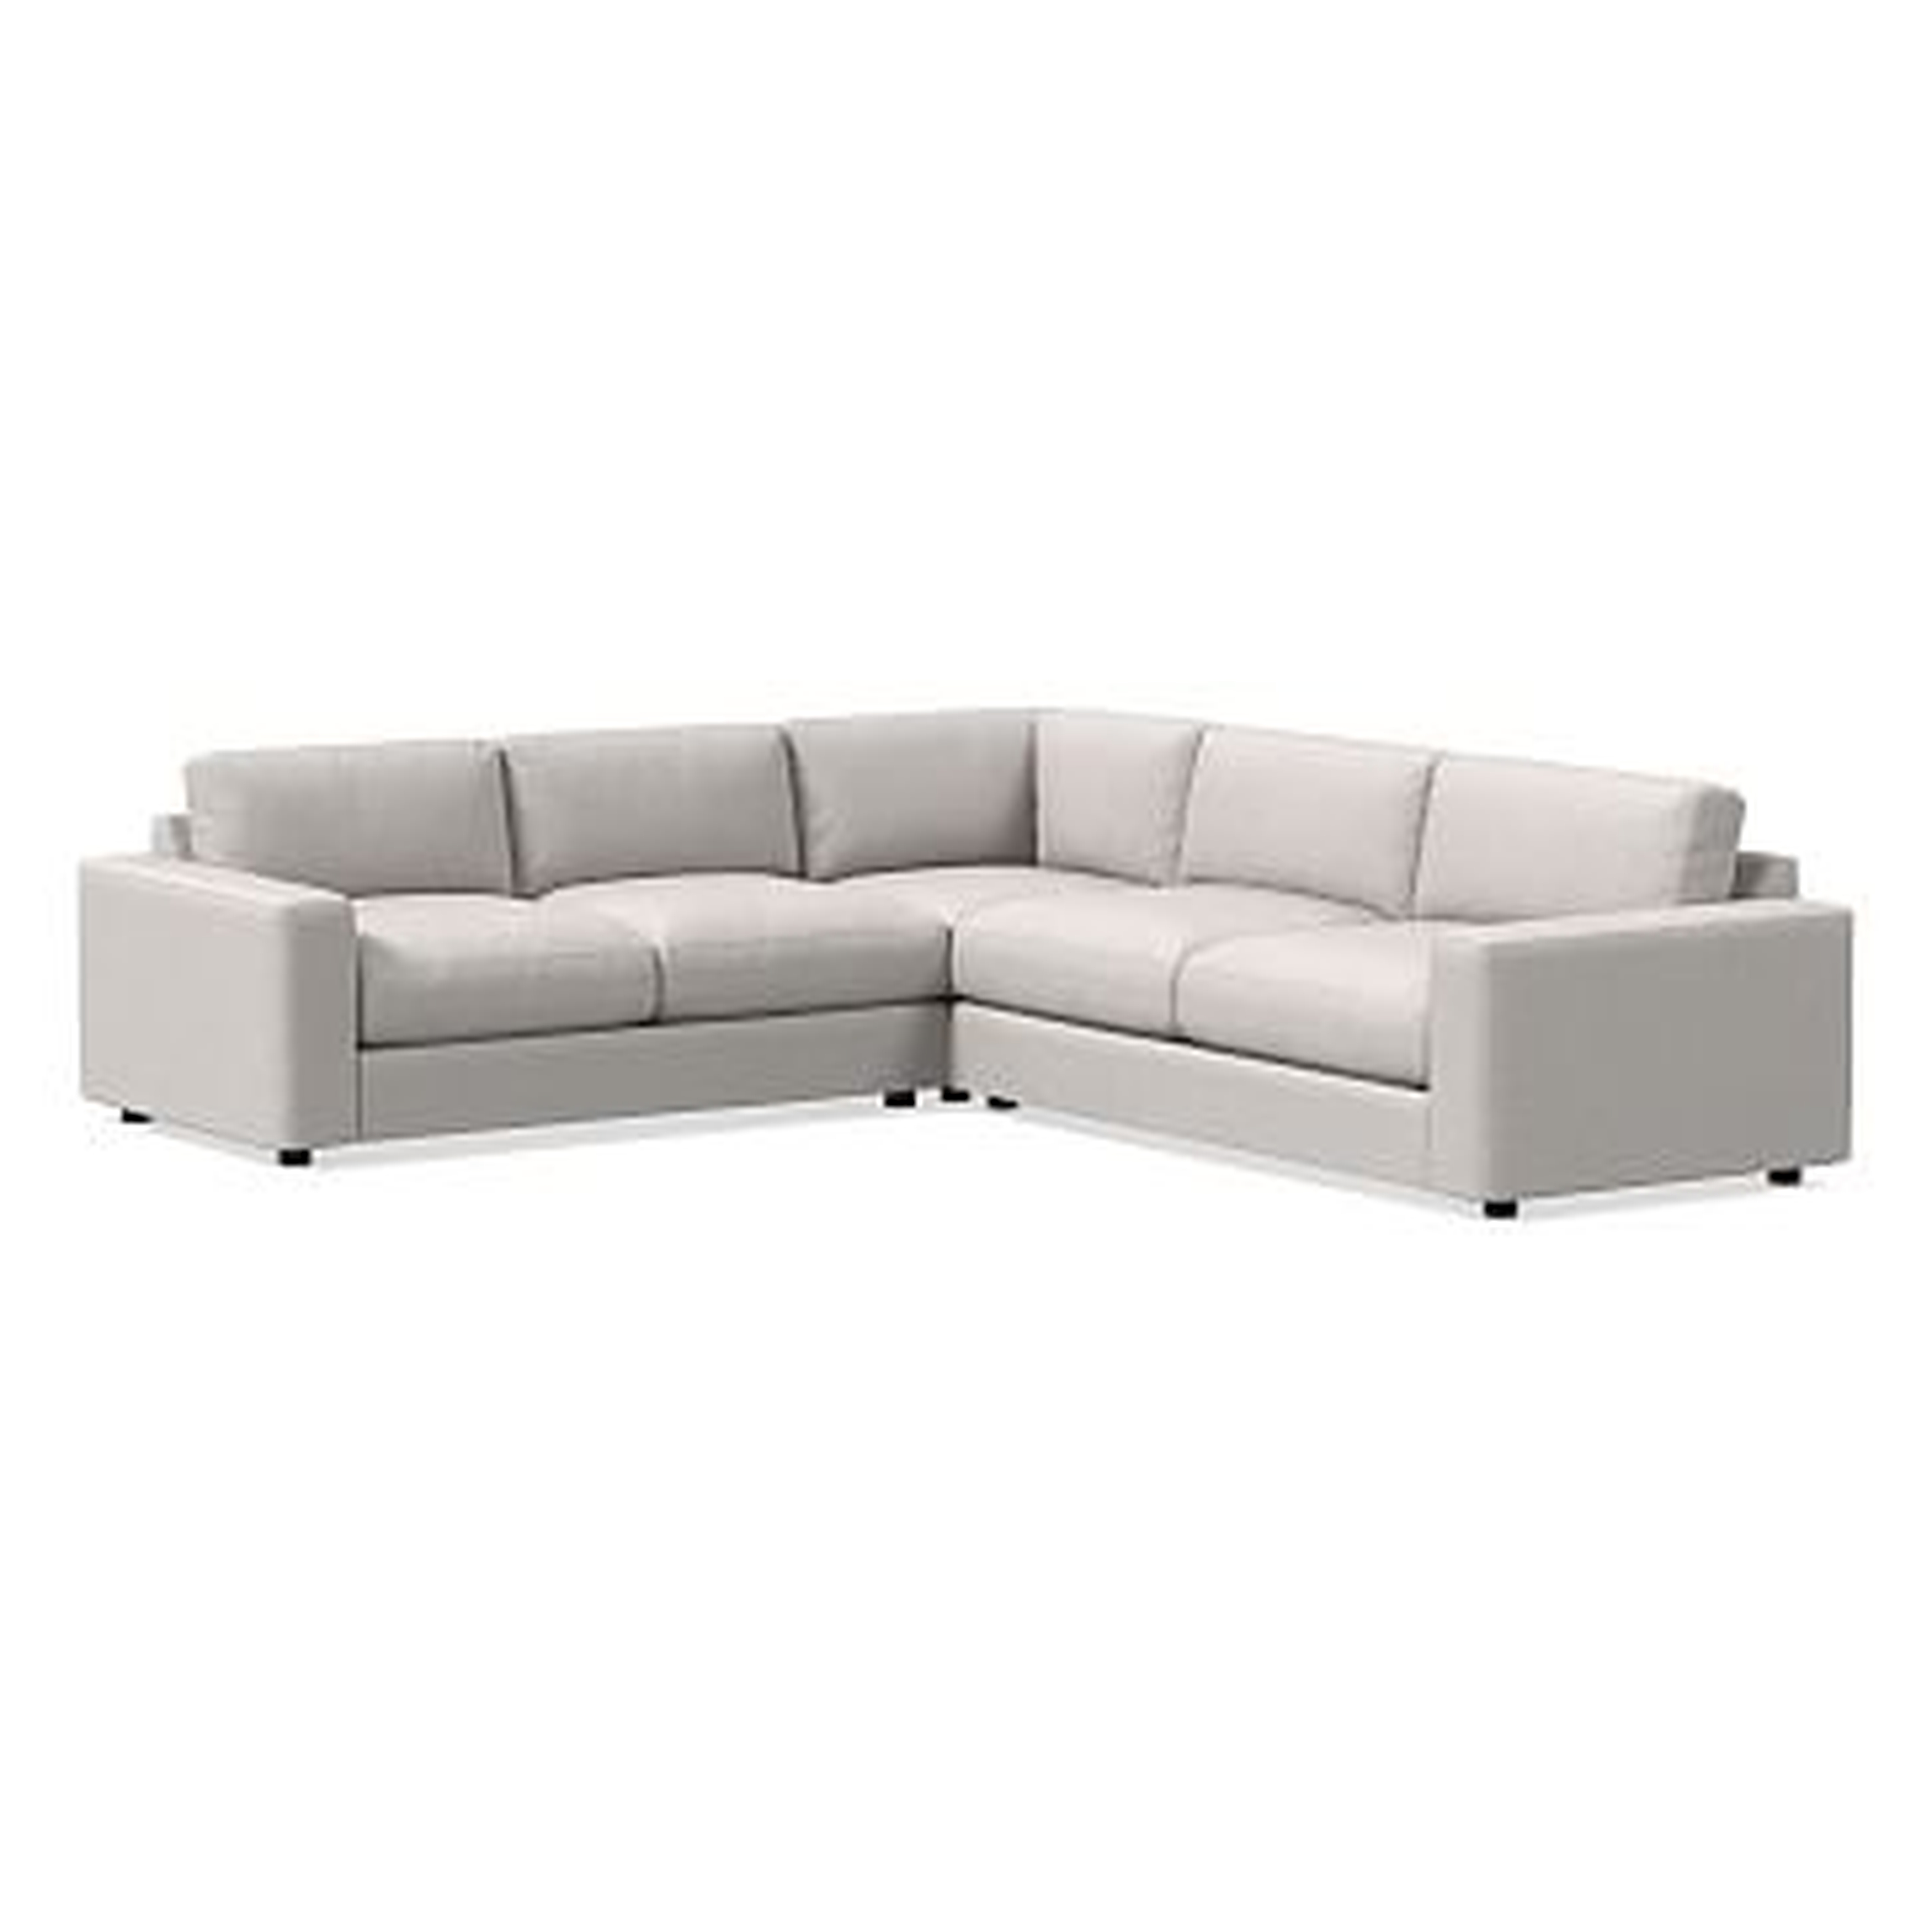 Urban Sectional Set 08: Left Arm 2 Seater Sofa, Corner, Right Arm 3 Seater Sofa, Down Blend, Performance Coastal Linen, Dove, Concealed Supports - West Elm